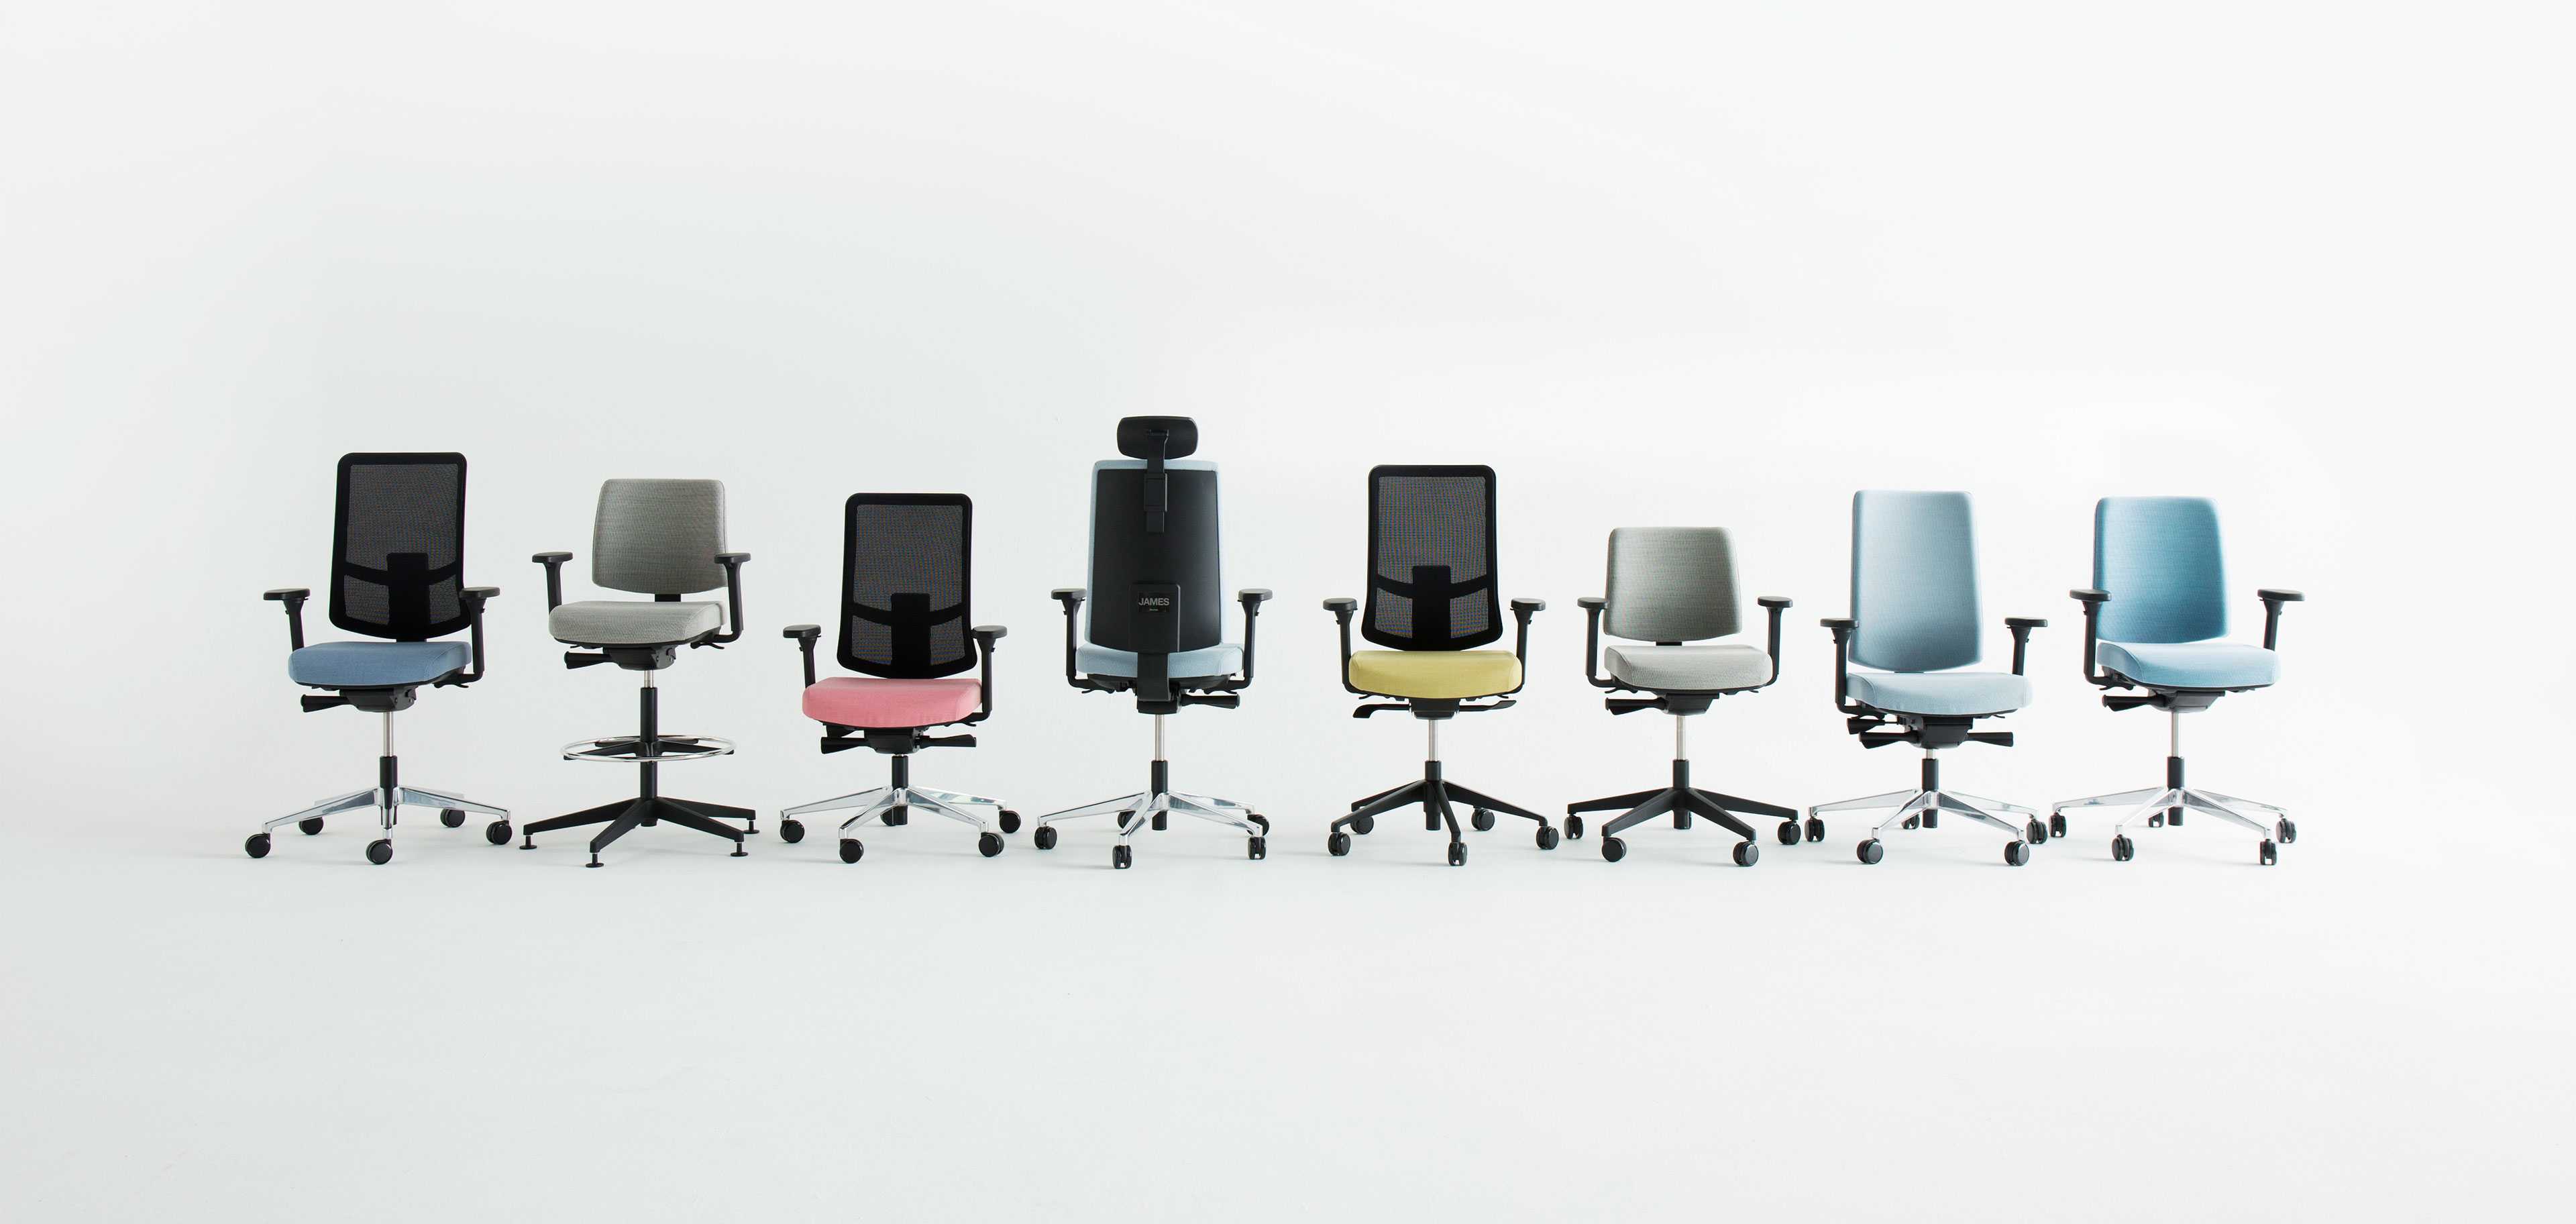 James task chairs in a row